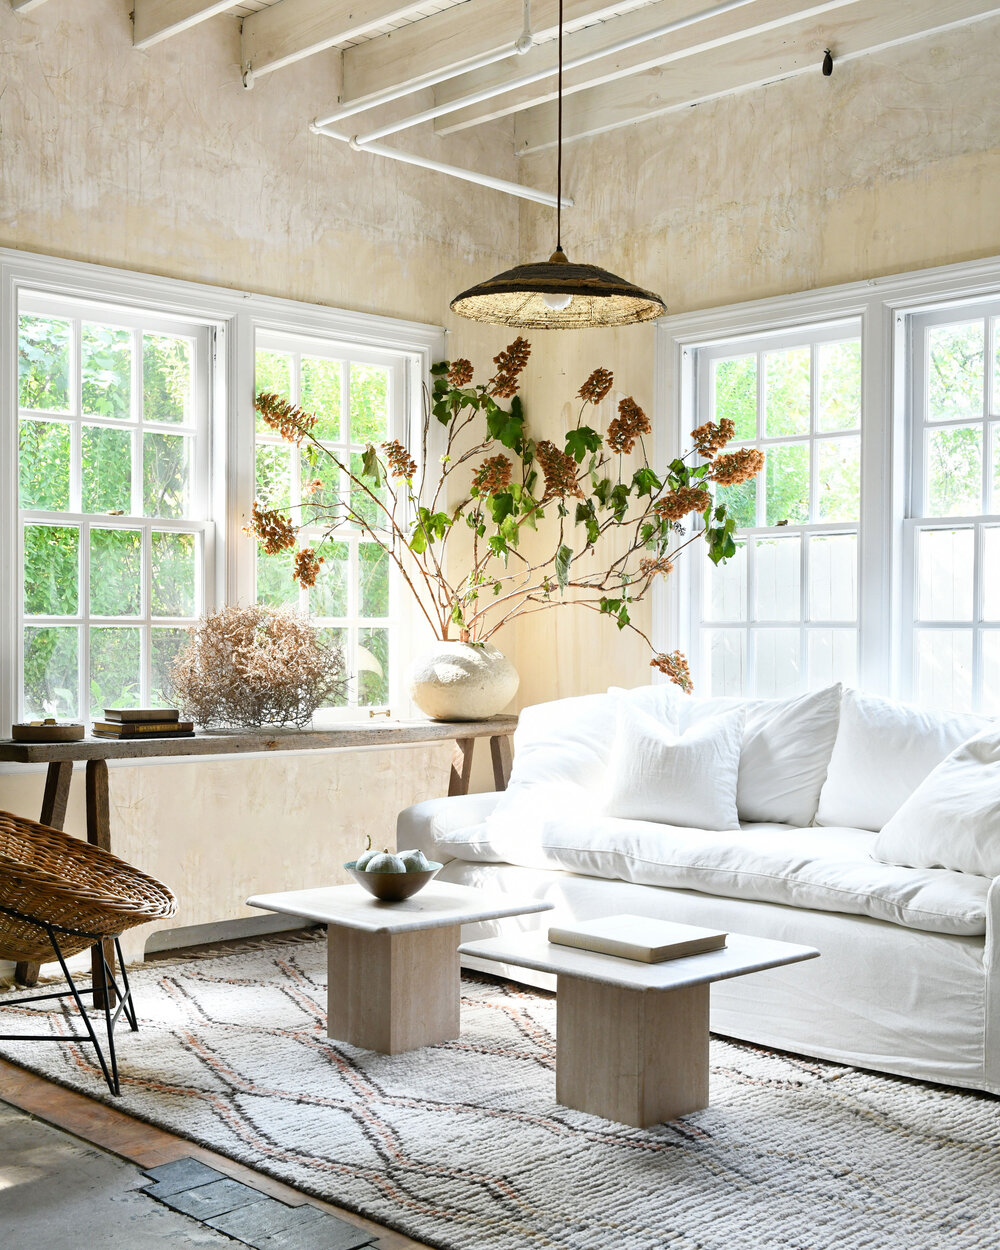 Leanne Ford designed living room with walls rubbed with coffee, a mix of pieced together flooring, white slipcovered sofa, and rustic organic modern style - photo by Erin Kelly.